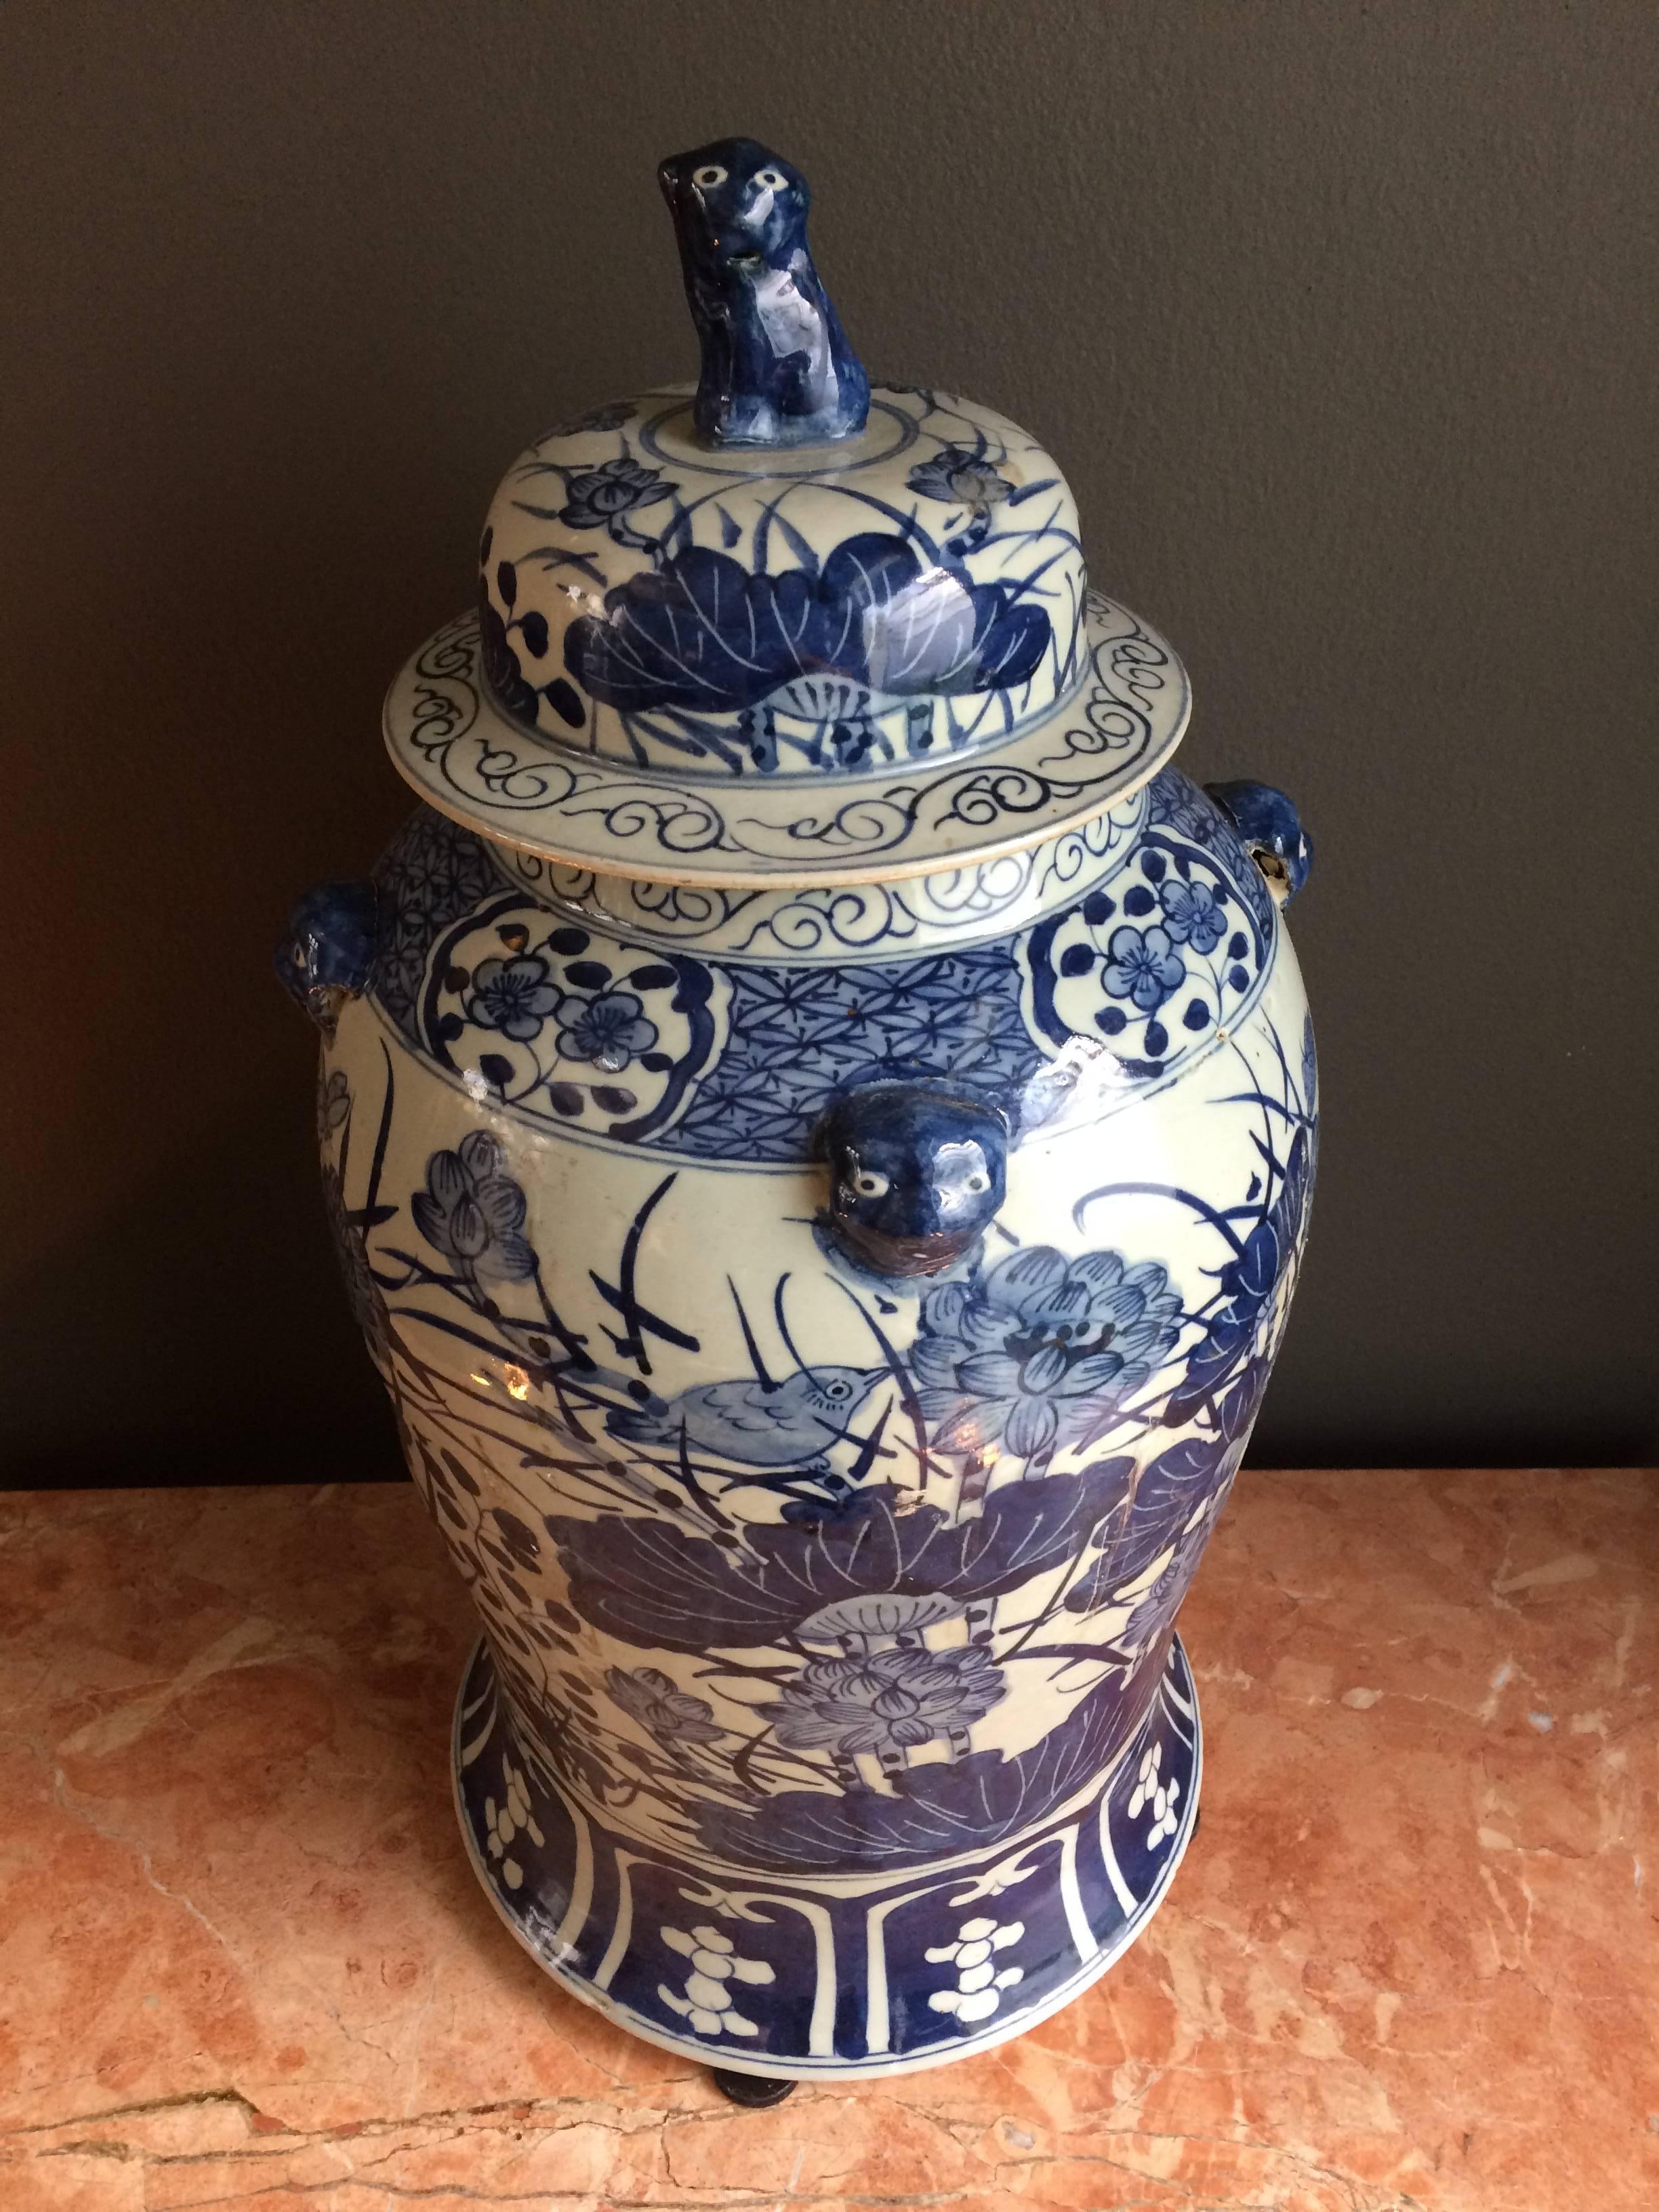 Single blue and white Chinese export lidded baluster jar.
Measures: 19-1/2